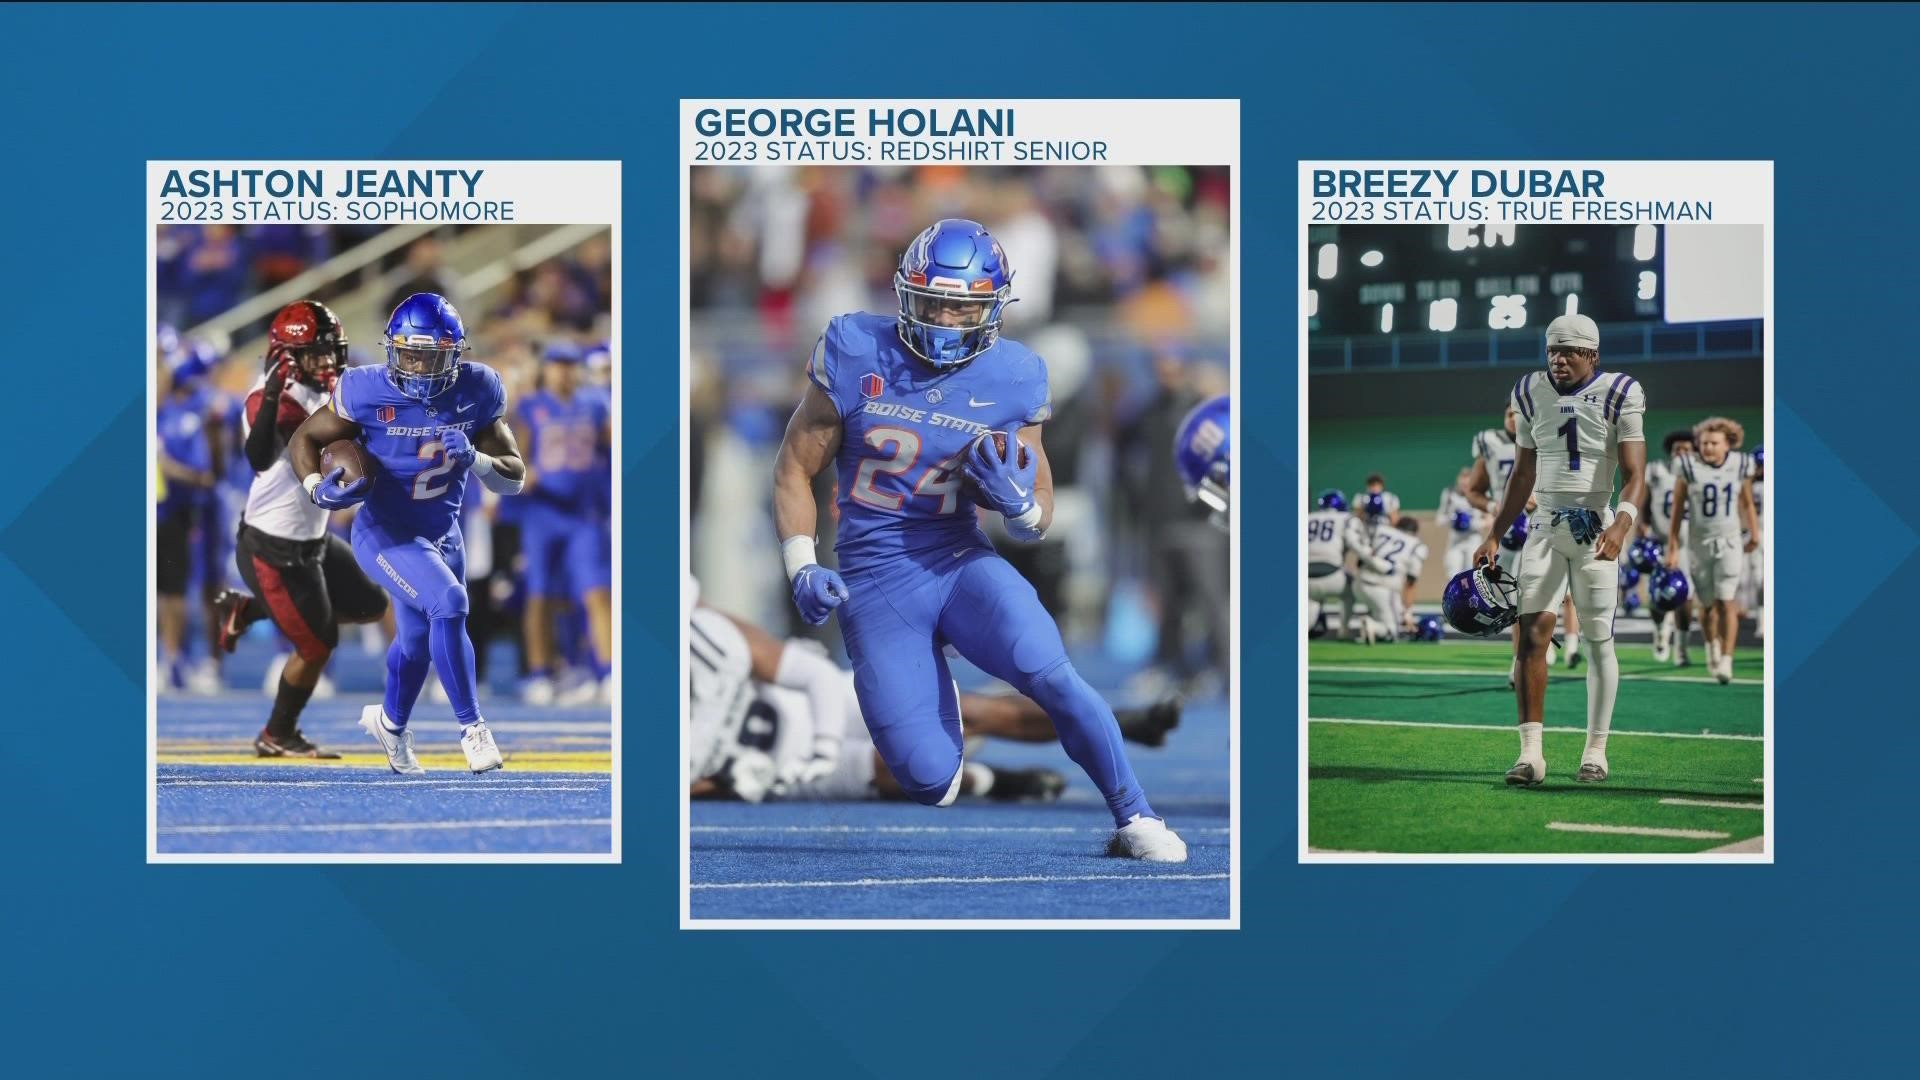 Holani announced he is returning to Boise State for one more ride. The Broncos also welcome back freshman standout Ashton Jeanty and signed Texas RB Breezy Dubar.